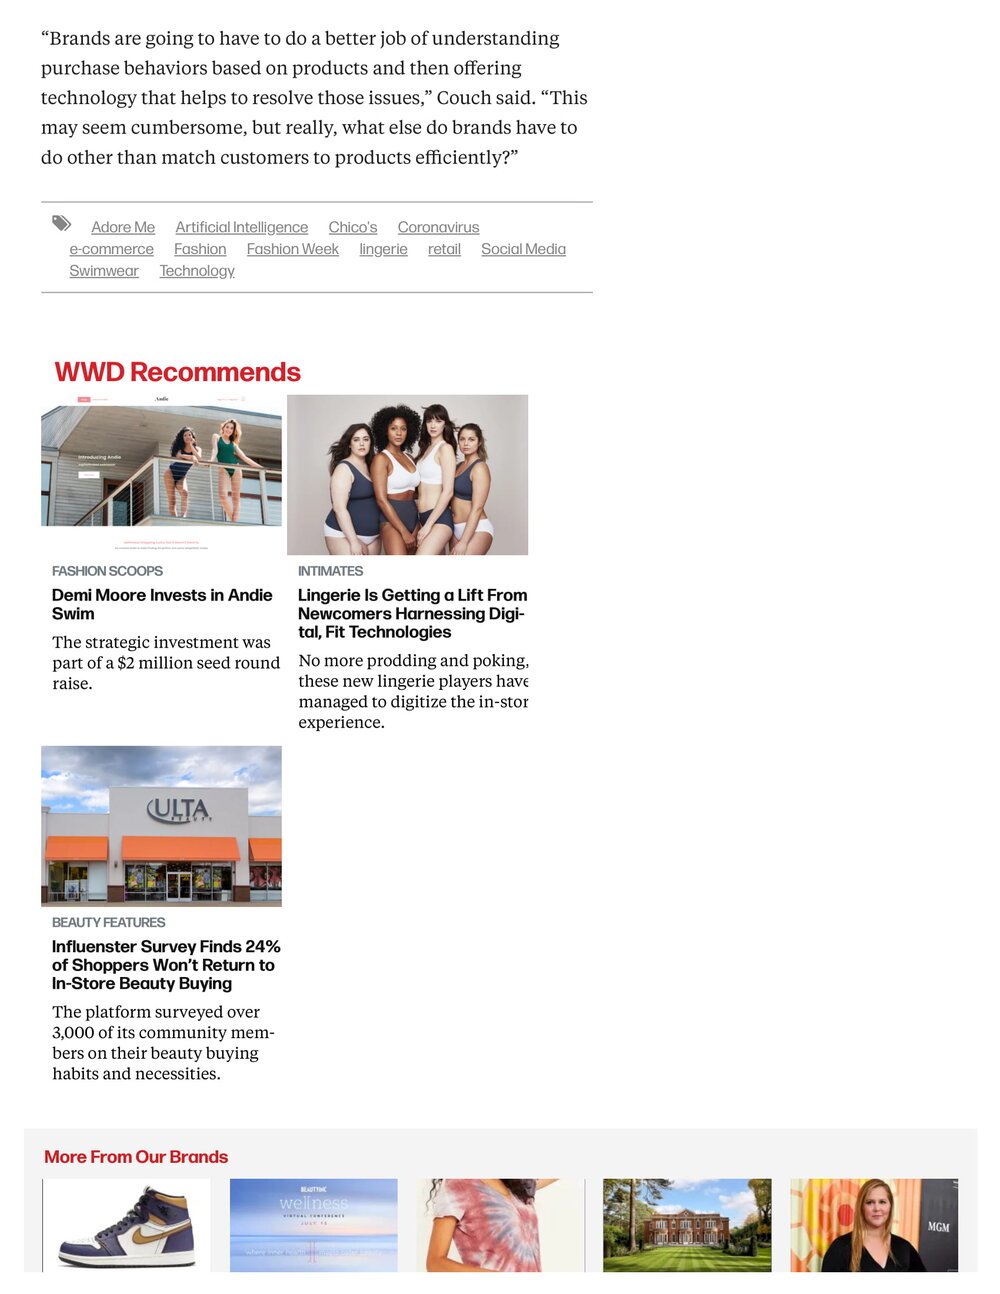 At-home Fit Technology – June 2020 - WWD-7.jpg